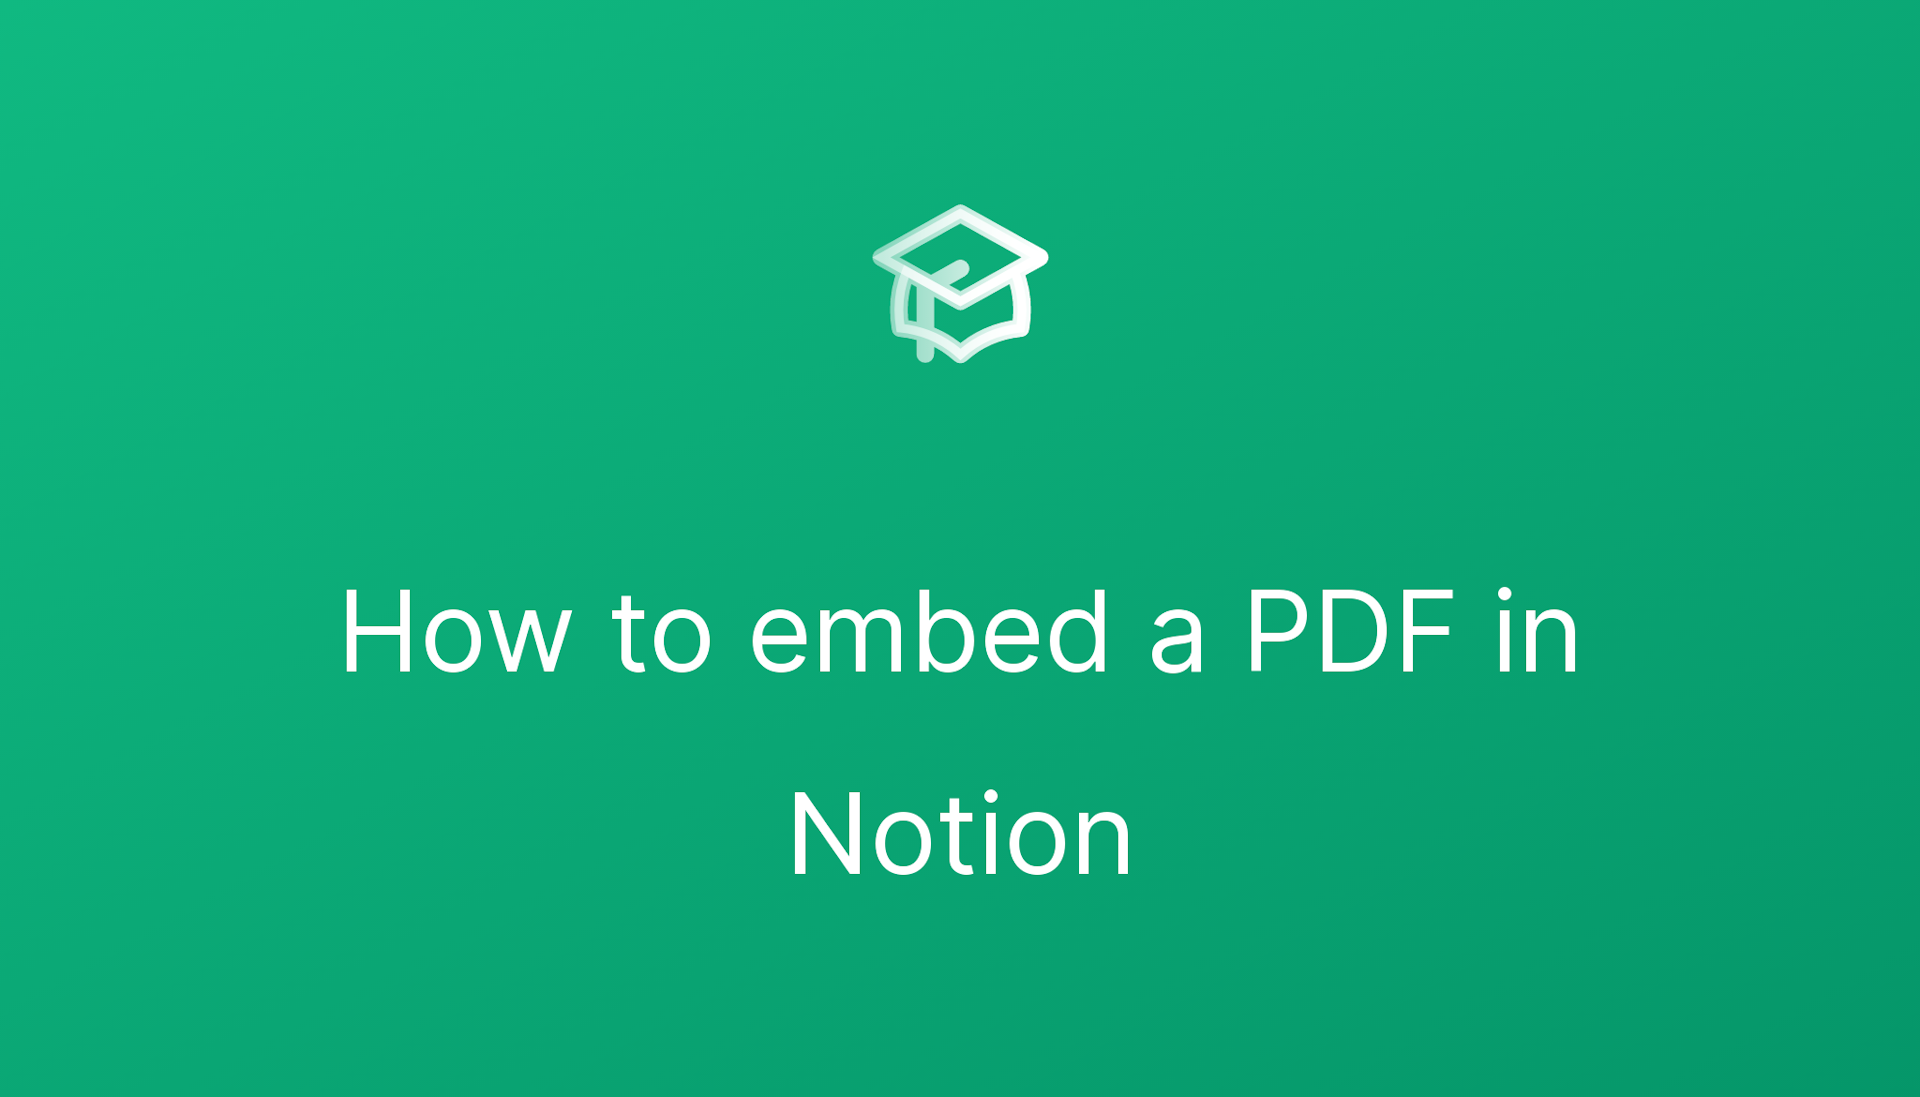 How to embed a PDF in Notion